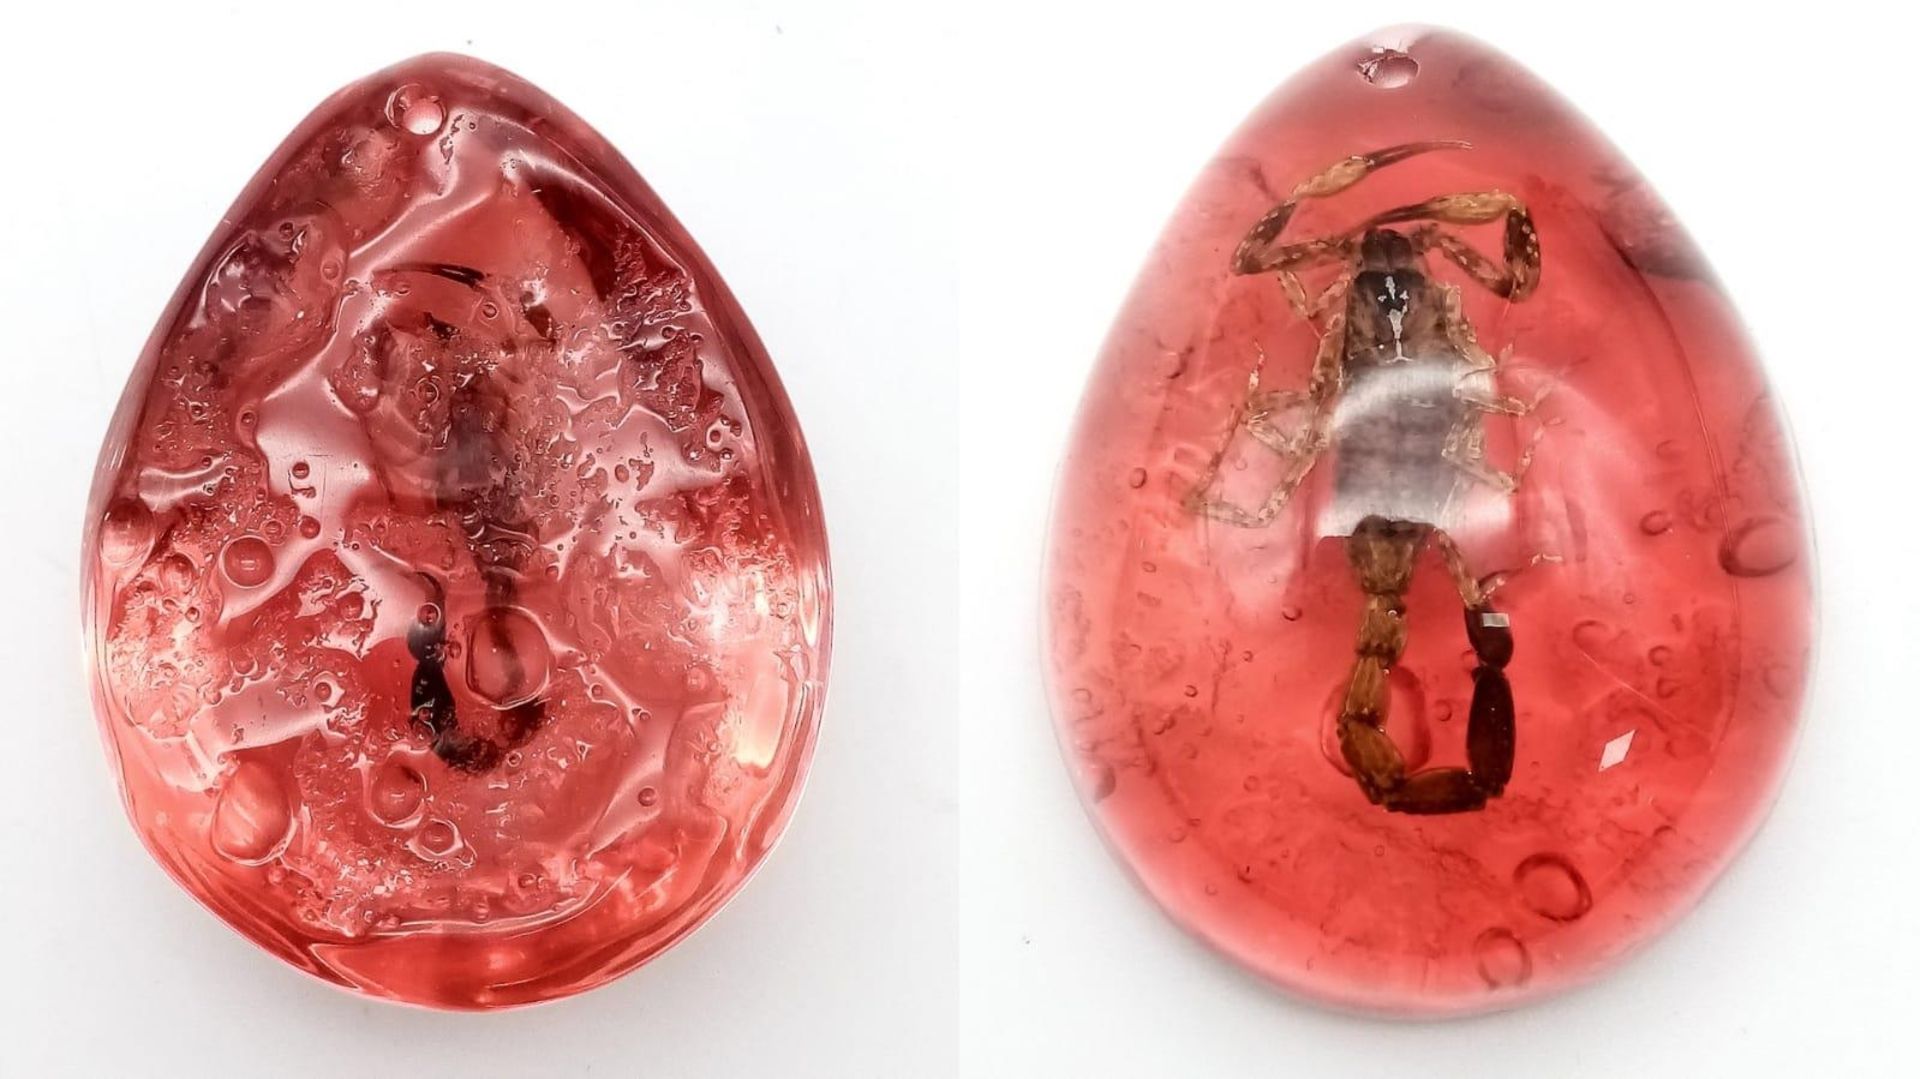 A Scorpion Ready to Strike - Unfortunately Now Frozen Forever in a Red Hellish Resin Prison. Pendant - Image 4 of 4